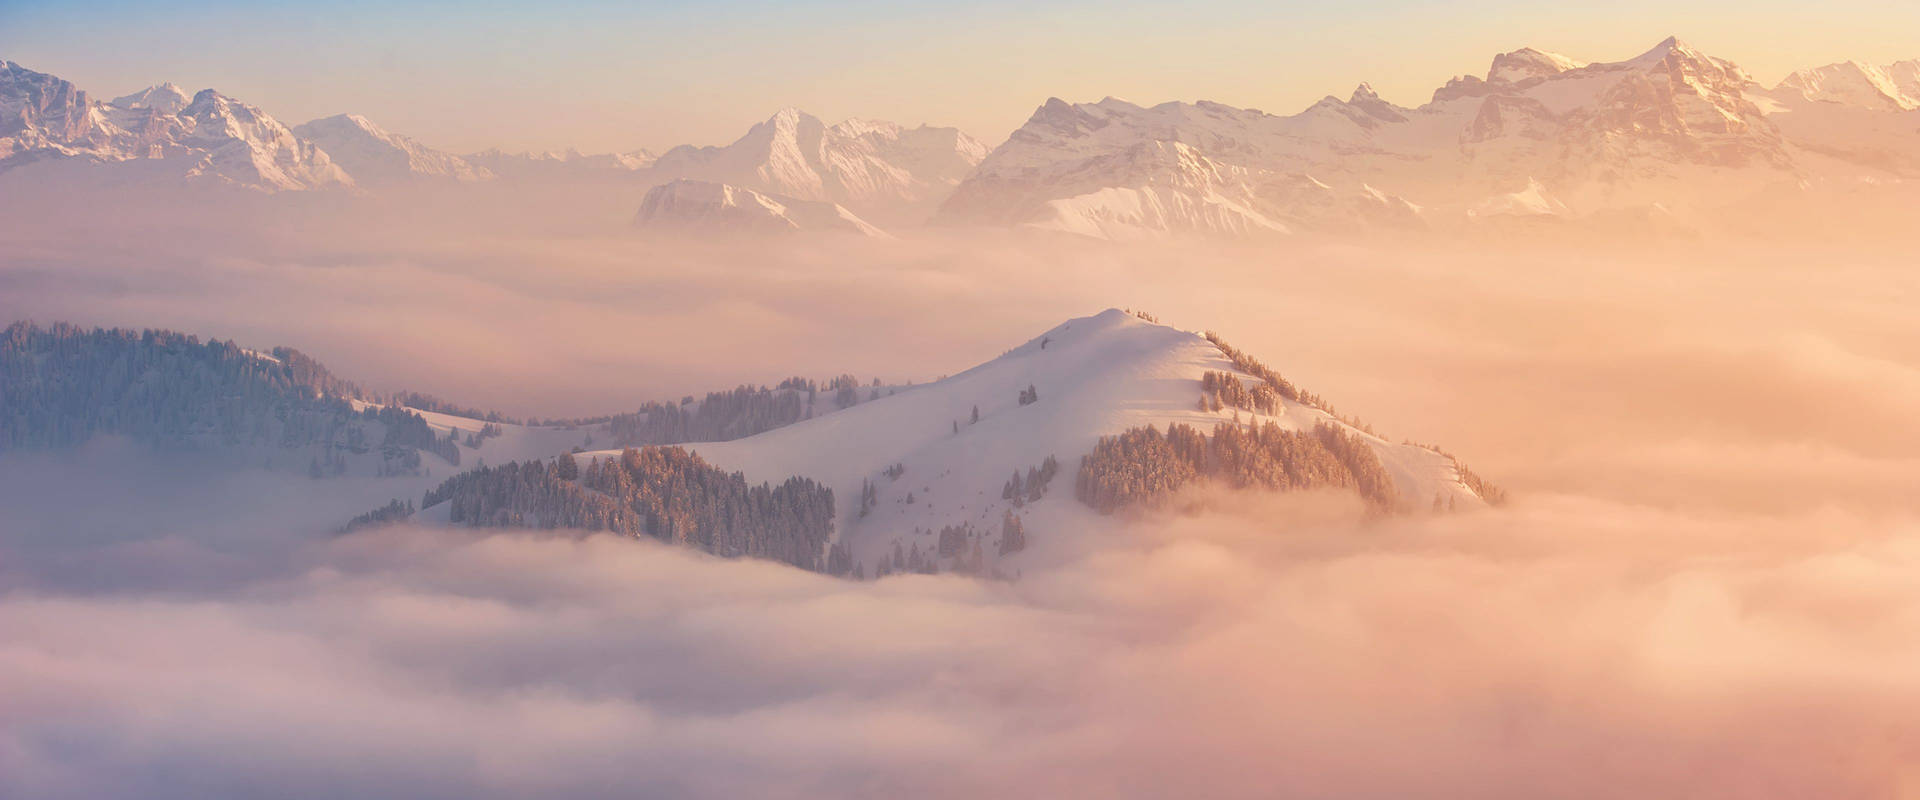 A Mountain Range Covered In Clouds At Sunrise Wallpaper